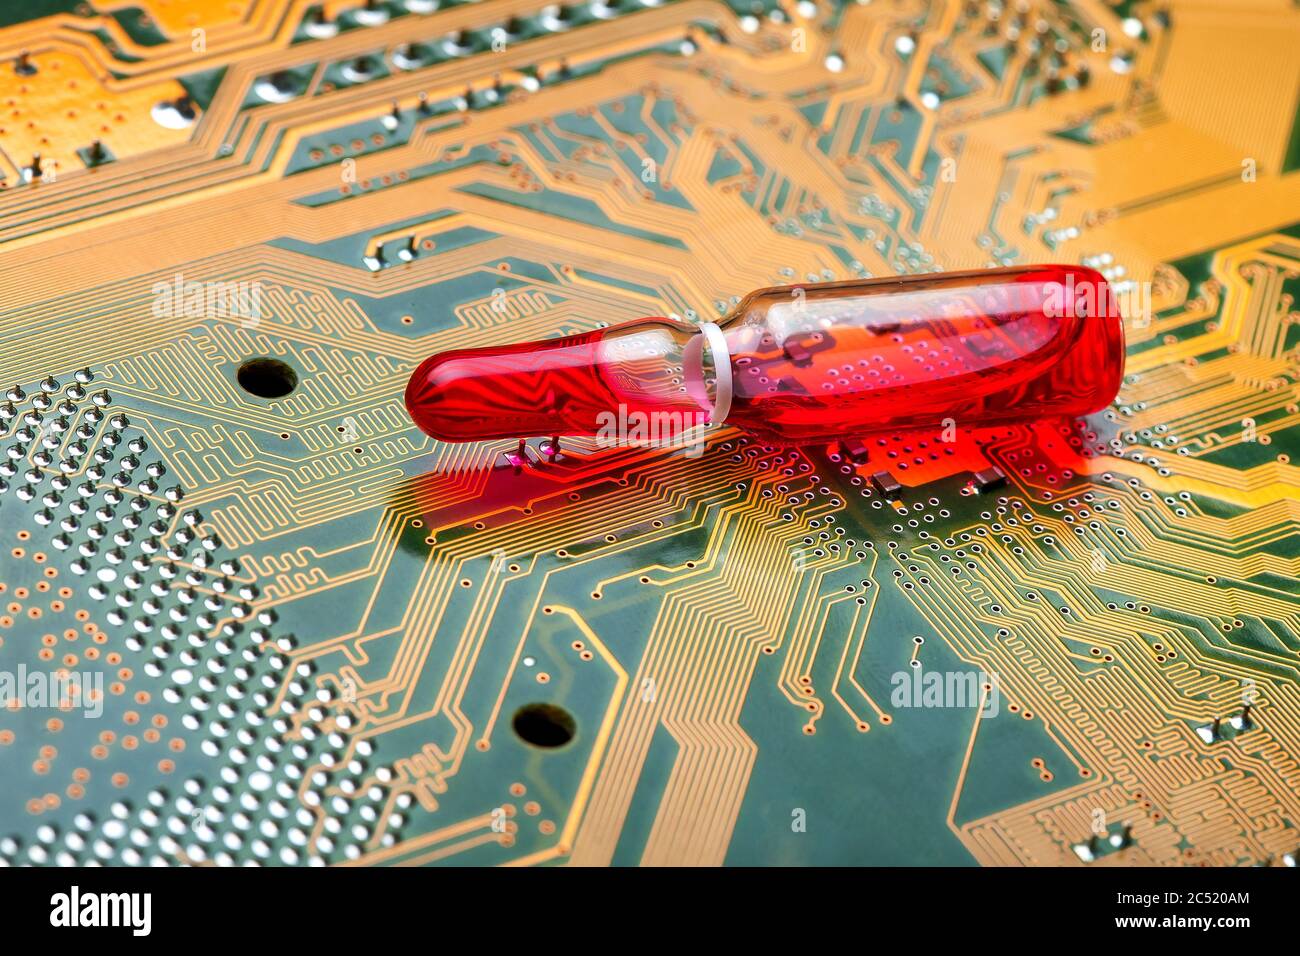 Glass transparent ampoule with red liquid modern medicine using electronic  methods and cyber printed silicone circuit boards, close-up Stock Photo -  Alamy